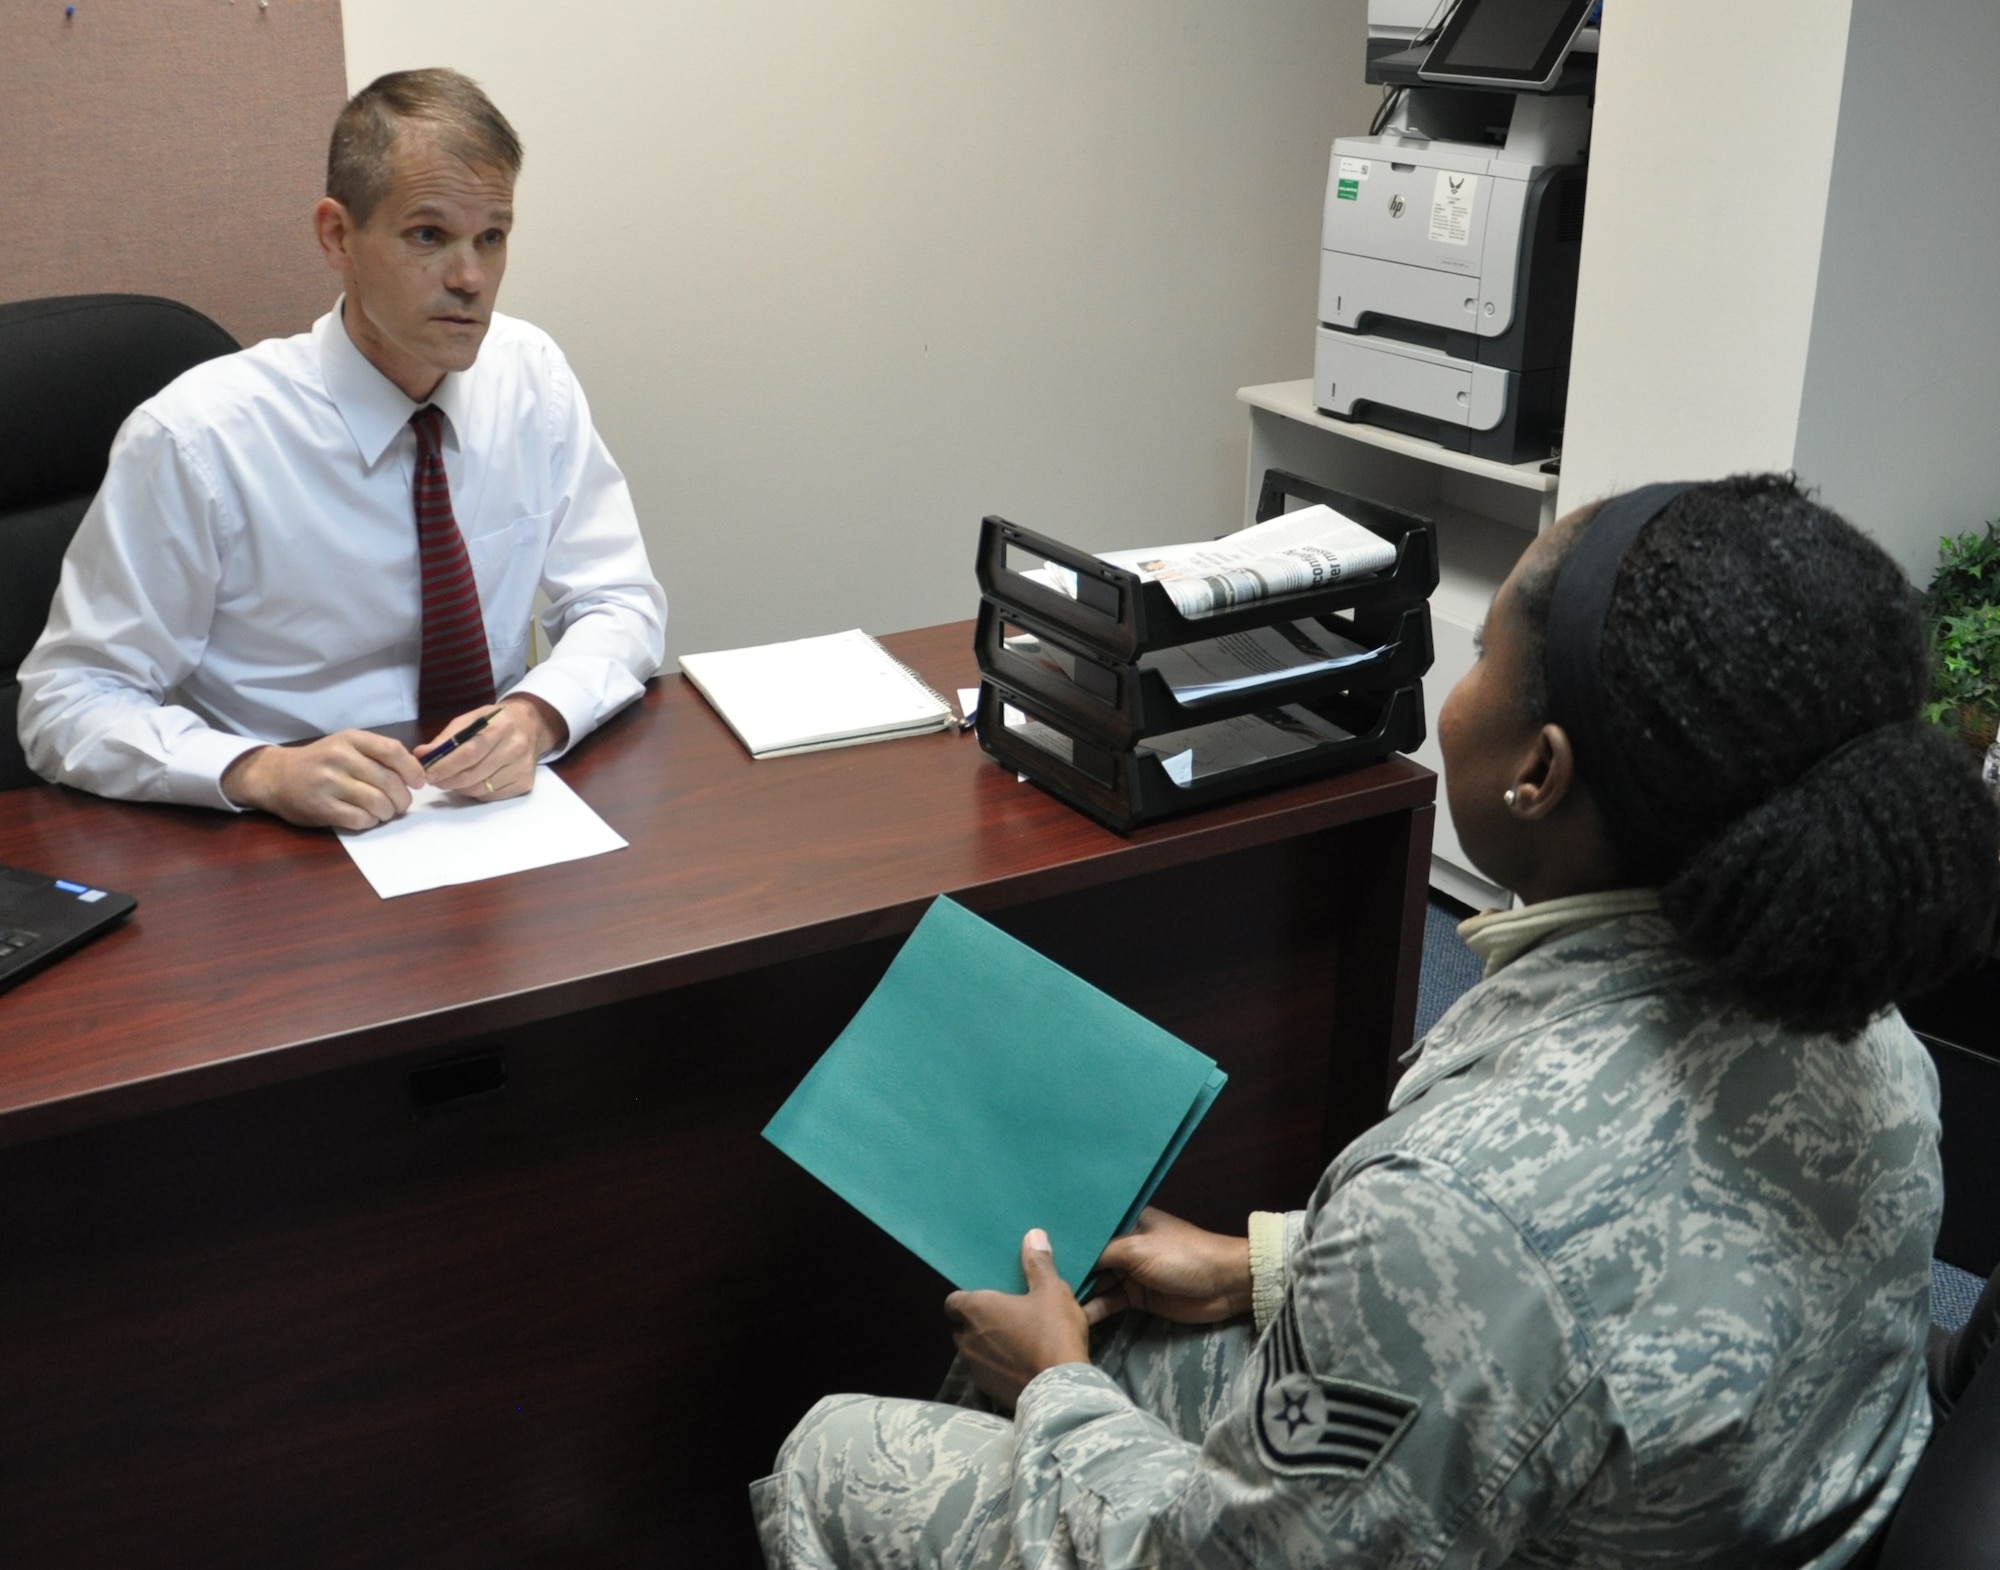 Staff Sgt. Jeria V. Dotson discusses finanancial planning with Micah Neuse, a personal financial counselor at the Airman and Family Readiness Center. (U.S. Air Force photo/W. Eugene Barnett Jr.)